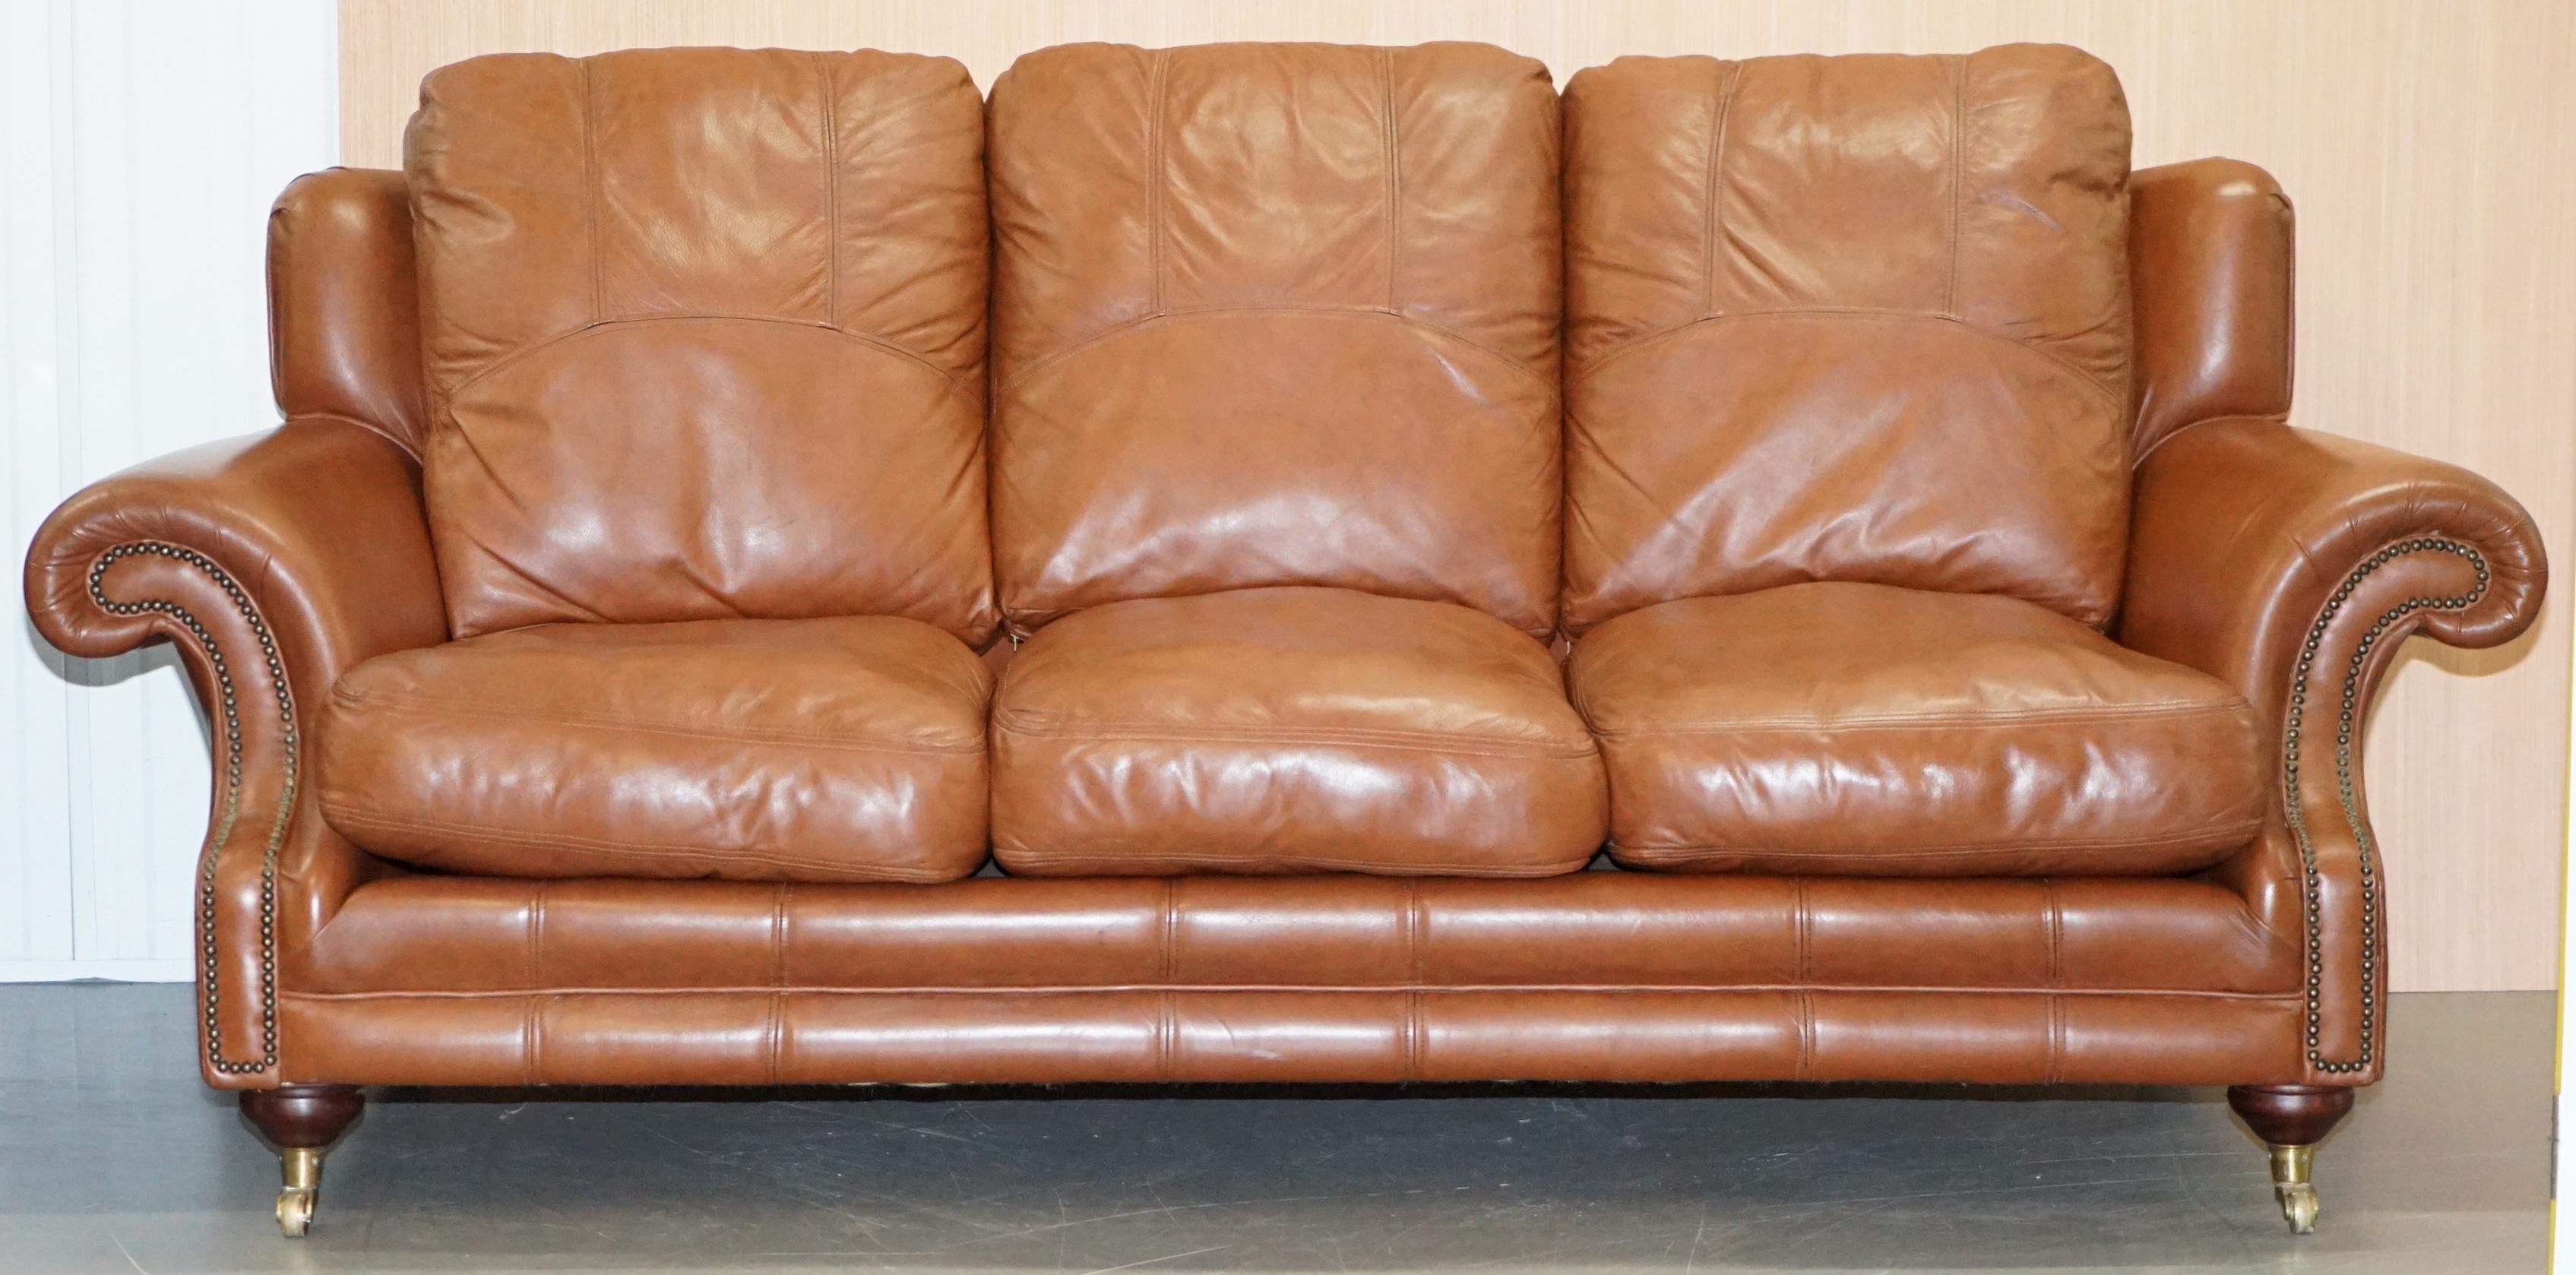 We are delighted to offer for sale this stunning RRP £3699 Medallion upholstery LTD San Remo Tan brown leather three seat sofa which is part of a suite

As mentioned this sofa is part of a suite, I also have the matching two seat sofa and armchair